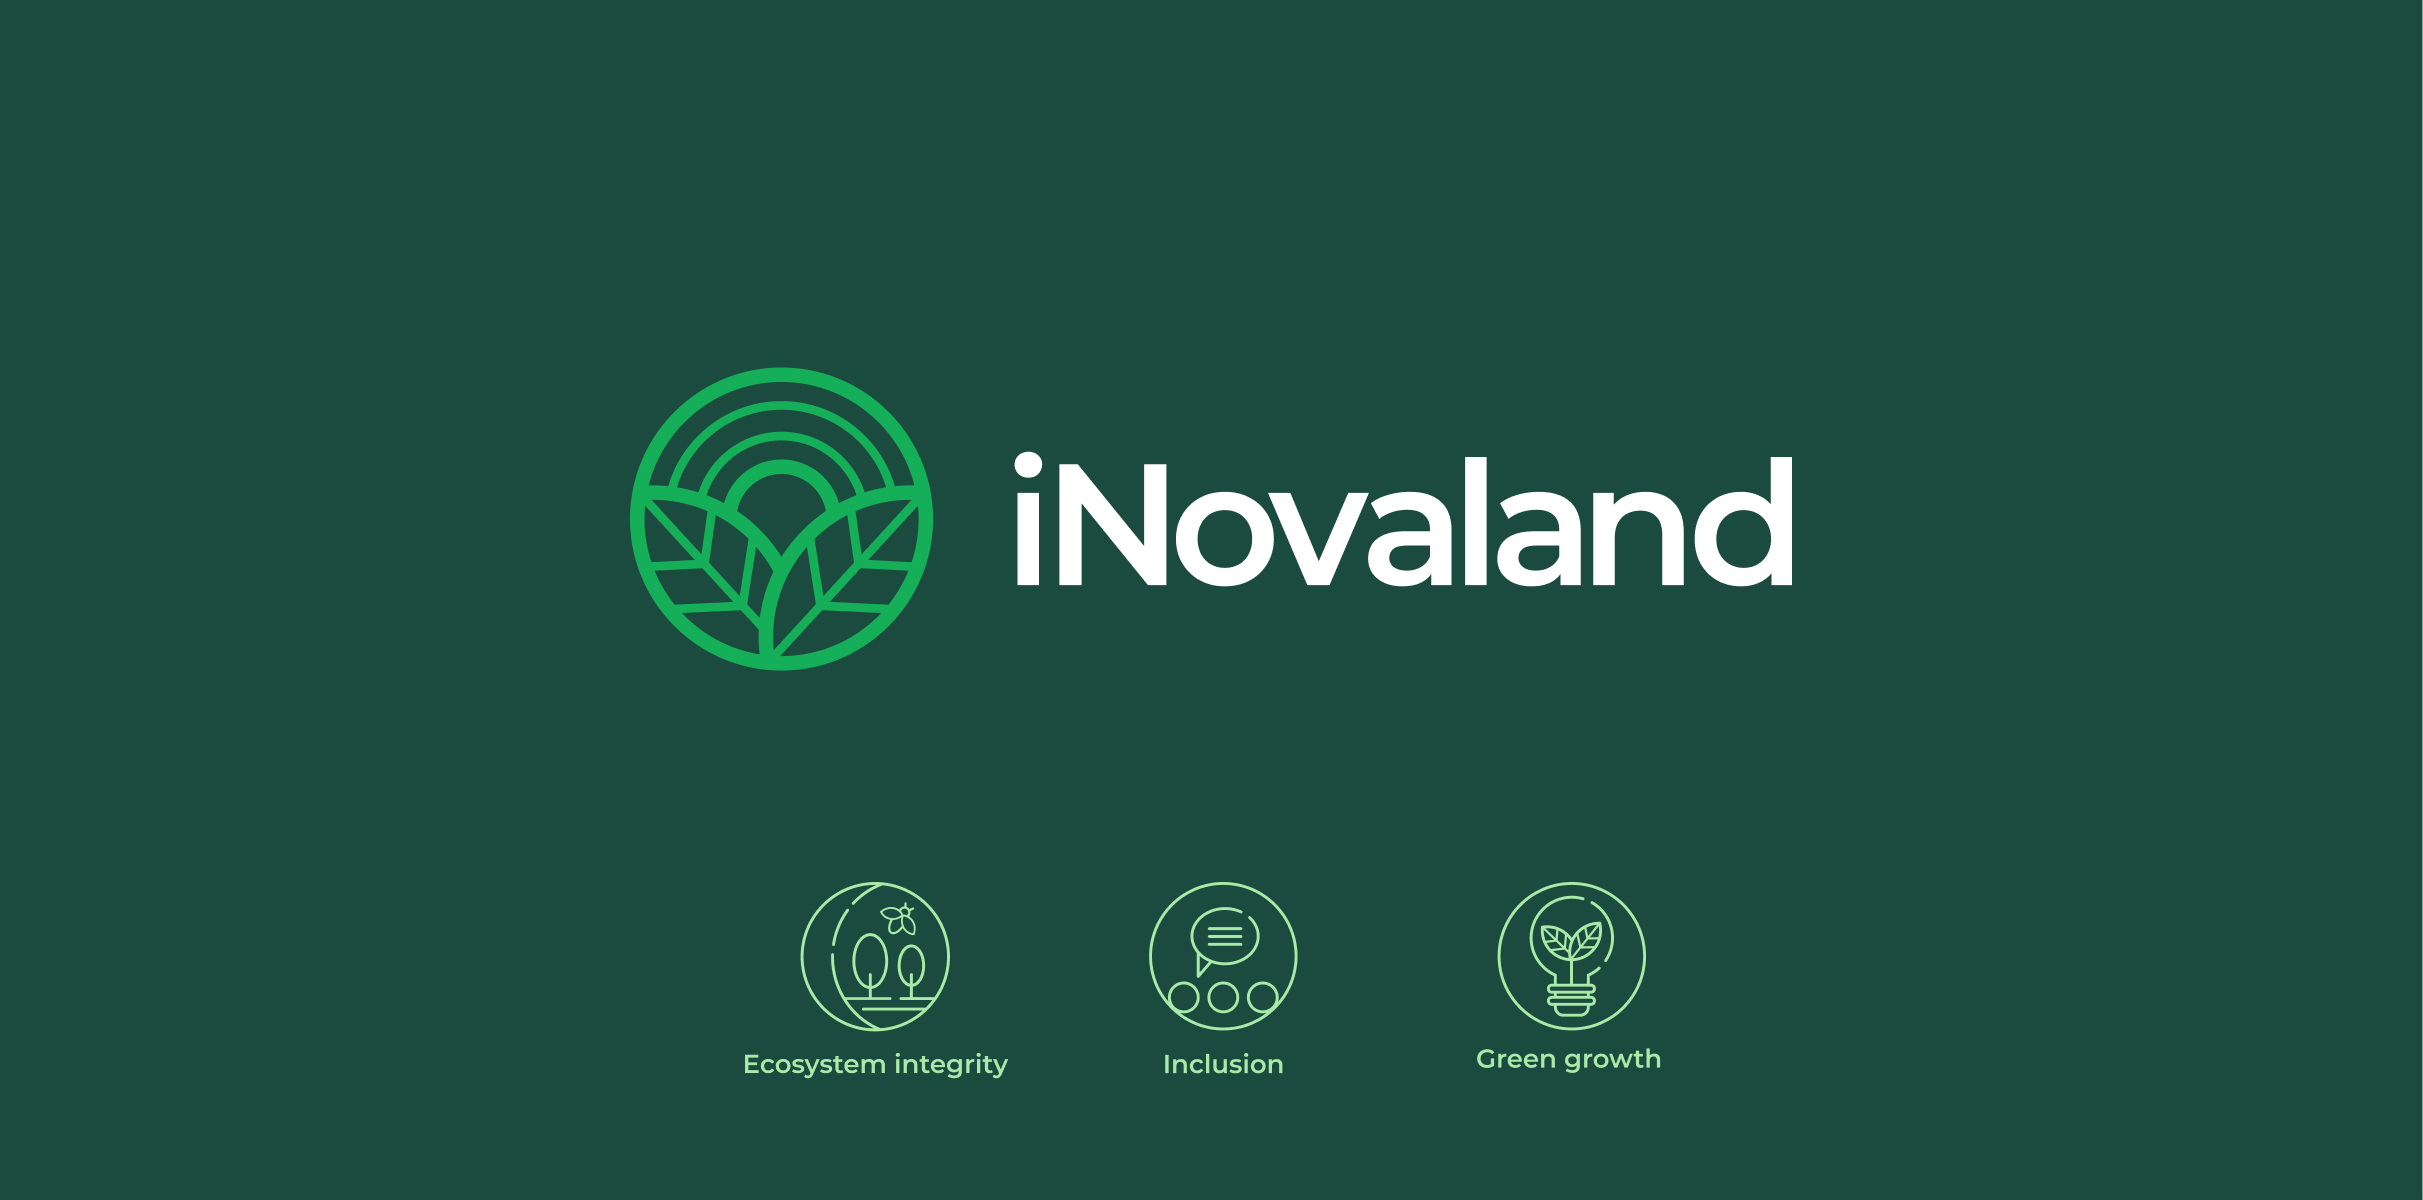 The iNovaland logo and three icons designed to depict their core business objectives – ecosystem integrity, inclusion and green growth.